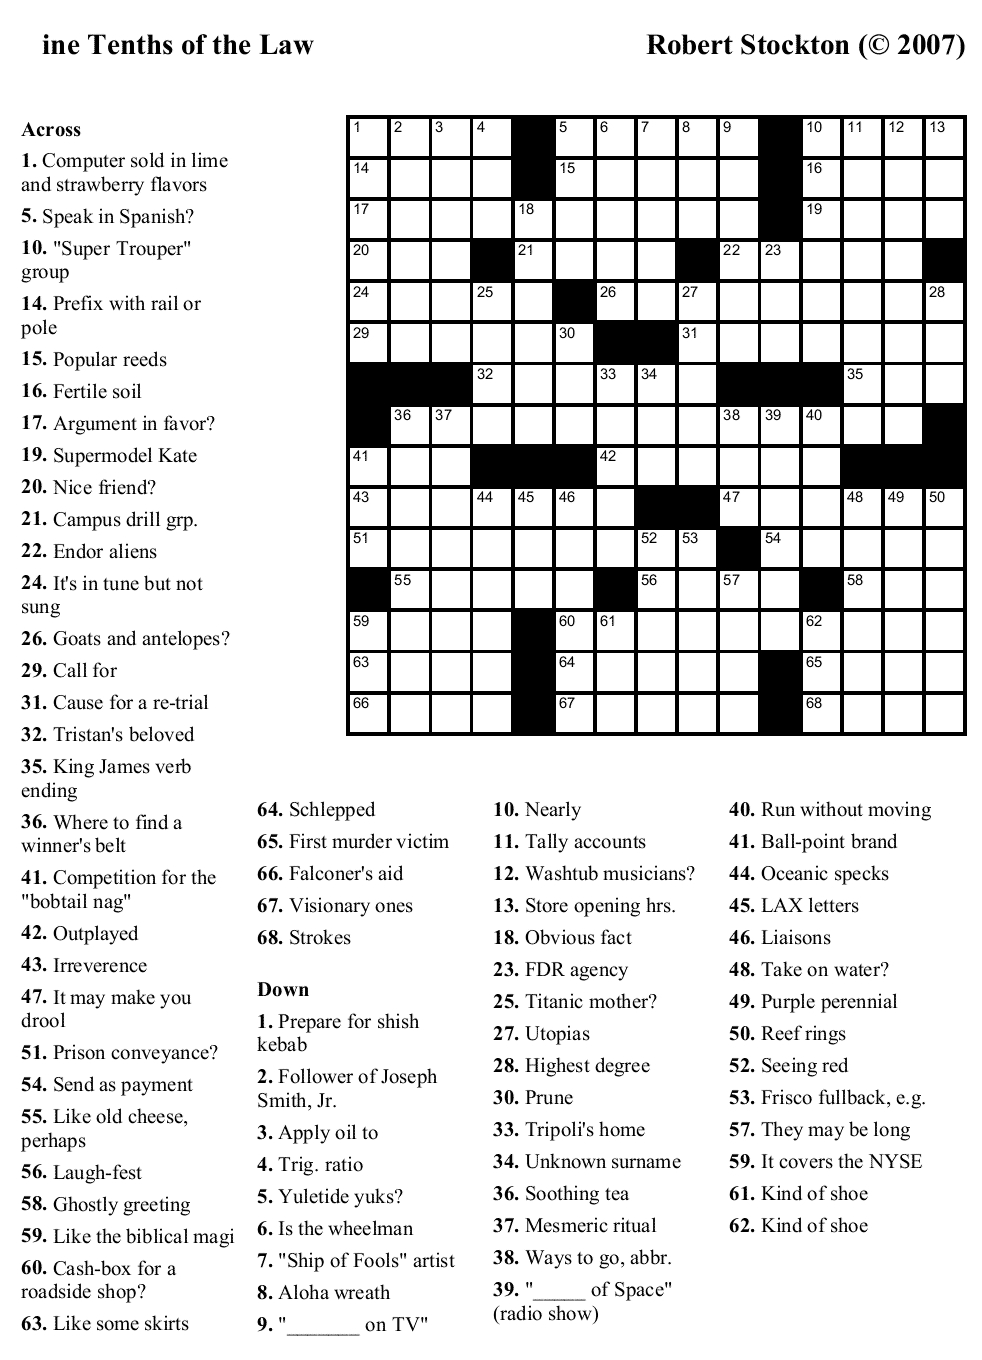 Crossword Puzzles Printable - Yahoo Image Search Results | Crossword - Printable Crosswords To Learn English